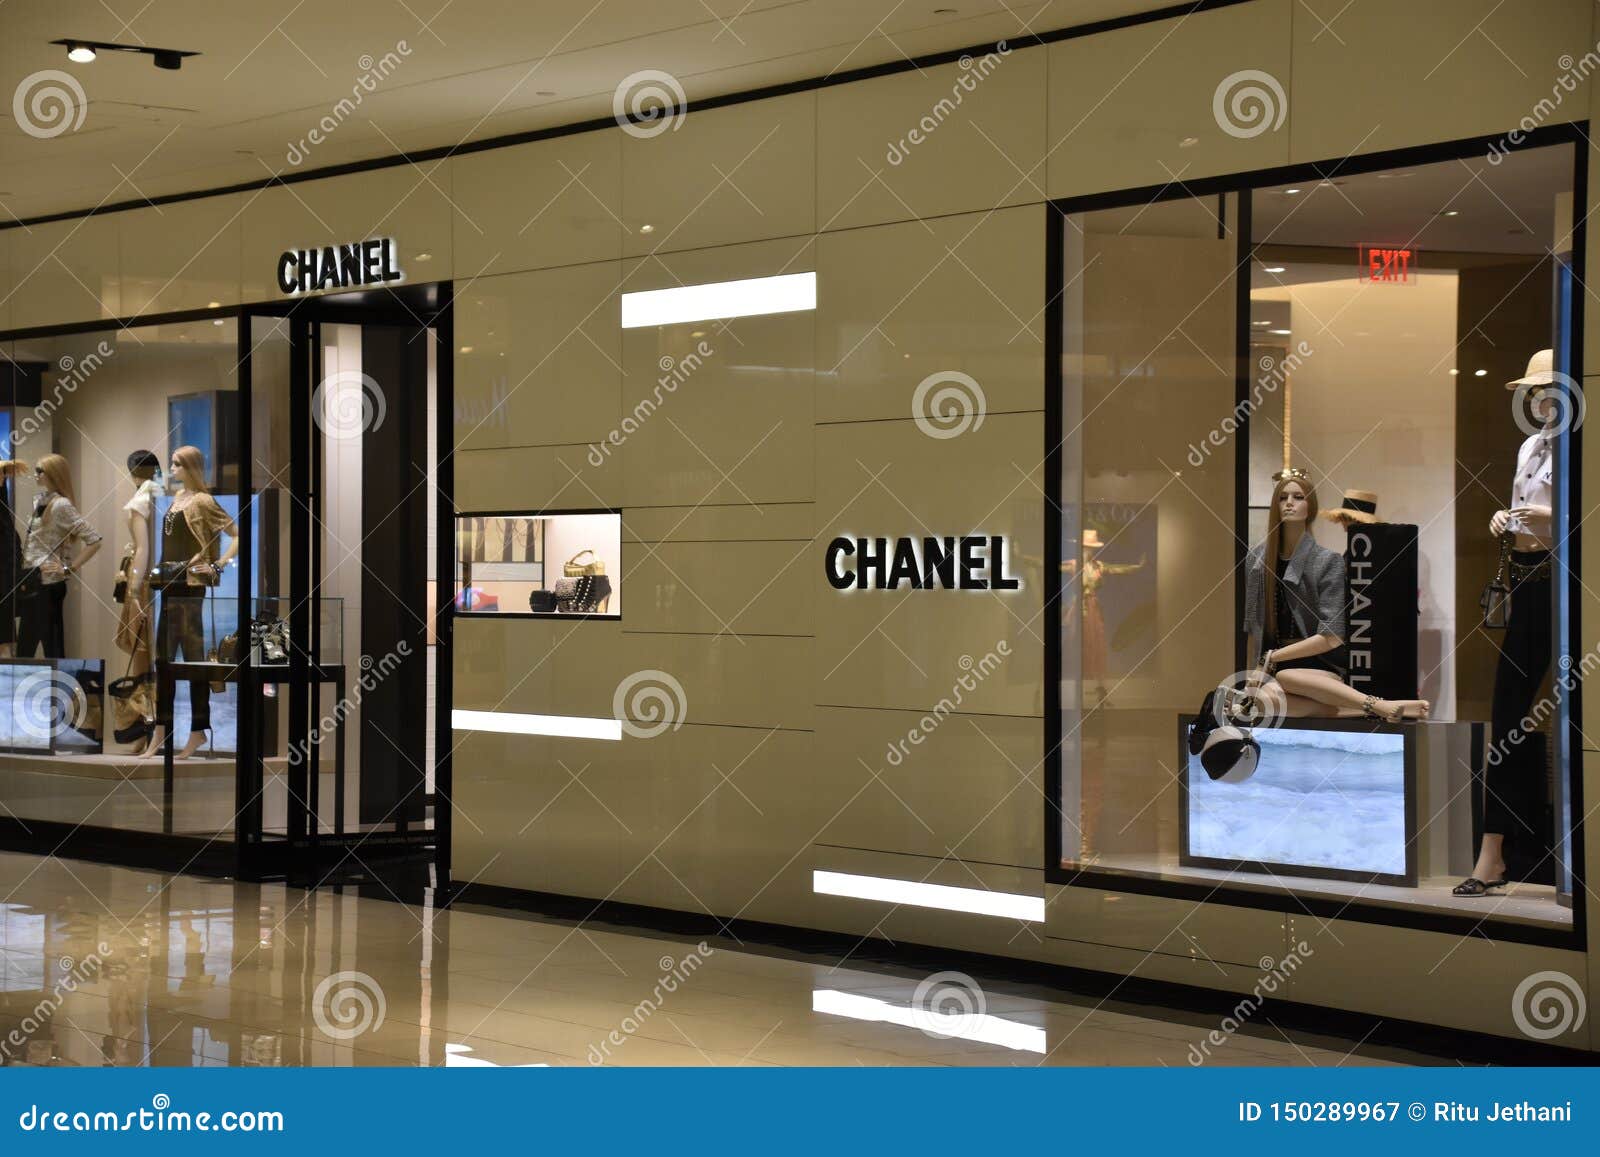 Chanel Store at the Galleria Mall in Houston, Texas Editorial Photography -  Image of architecture, city: 150289967